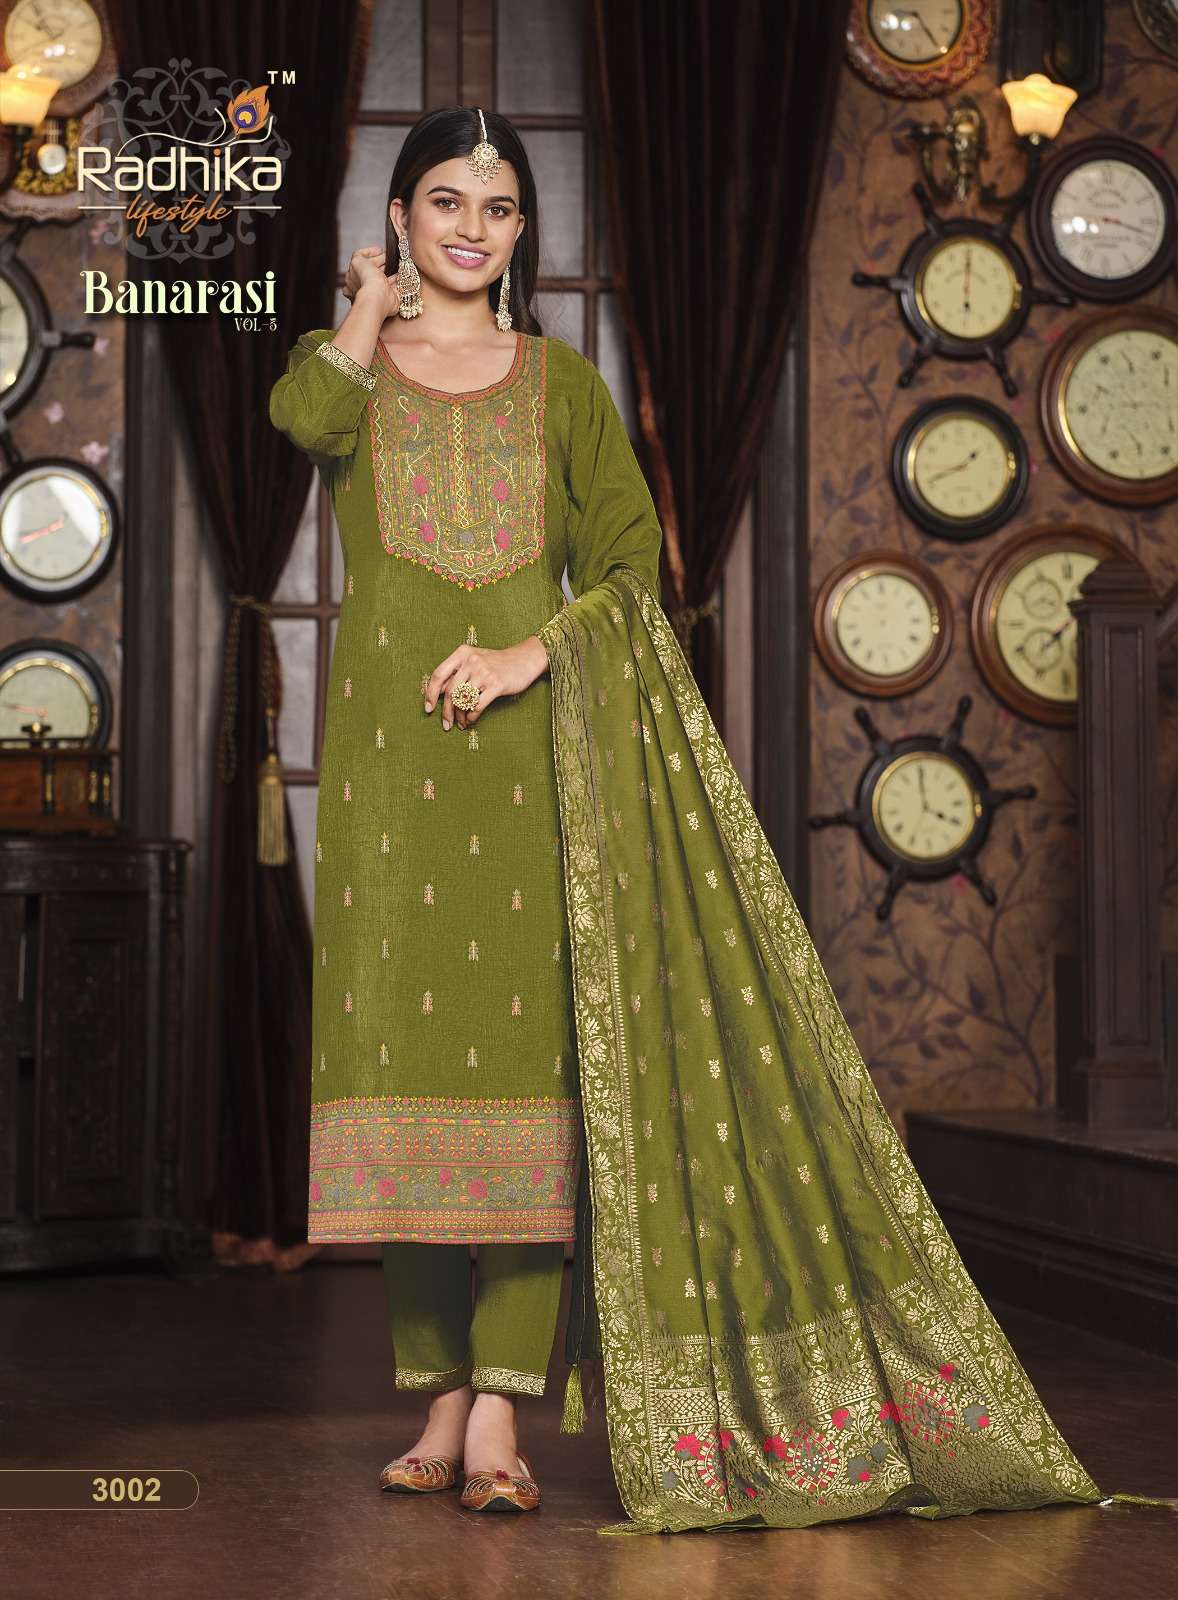 Banarasi Vol-3 By Radhika Lifestyle 3001 To 3006 Series Beautiful Stylish Suits Fancy Colorful Casual Wear & Ethnic Wear & Ready To Wear Pure Dola Silk Dresses At Wholesale Price